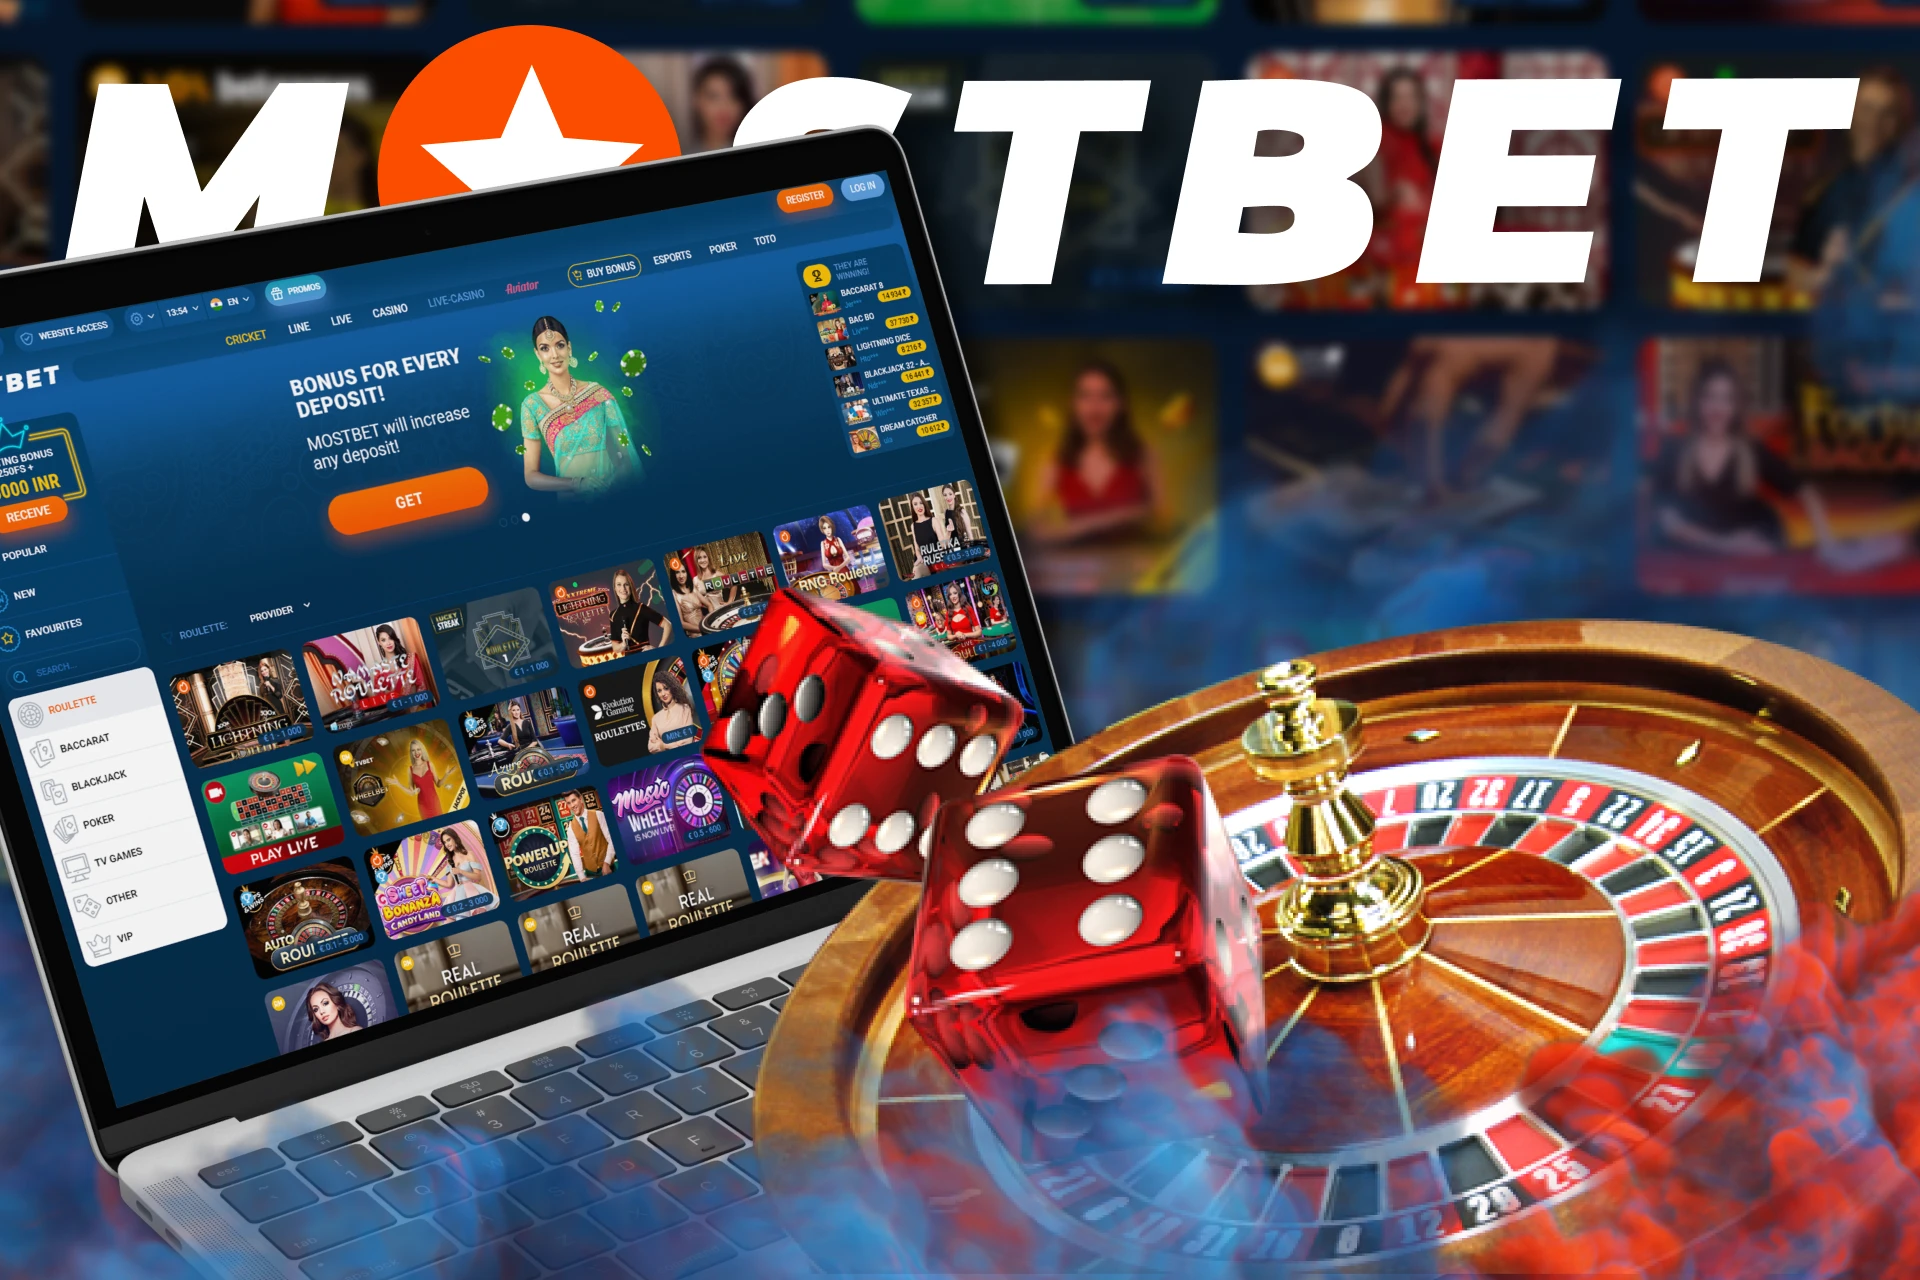 Try your luck playing roulette with Mostbet.